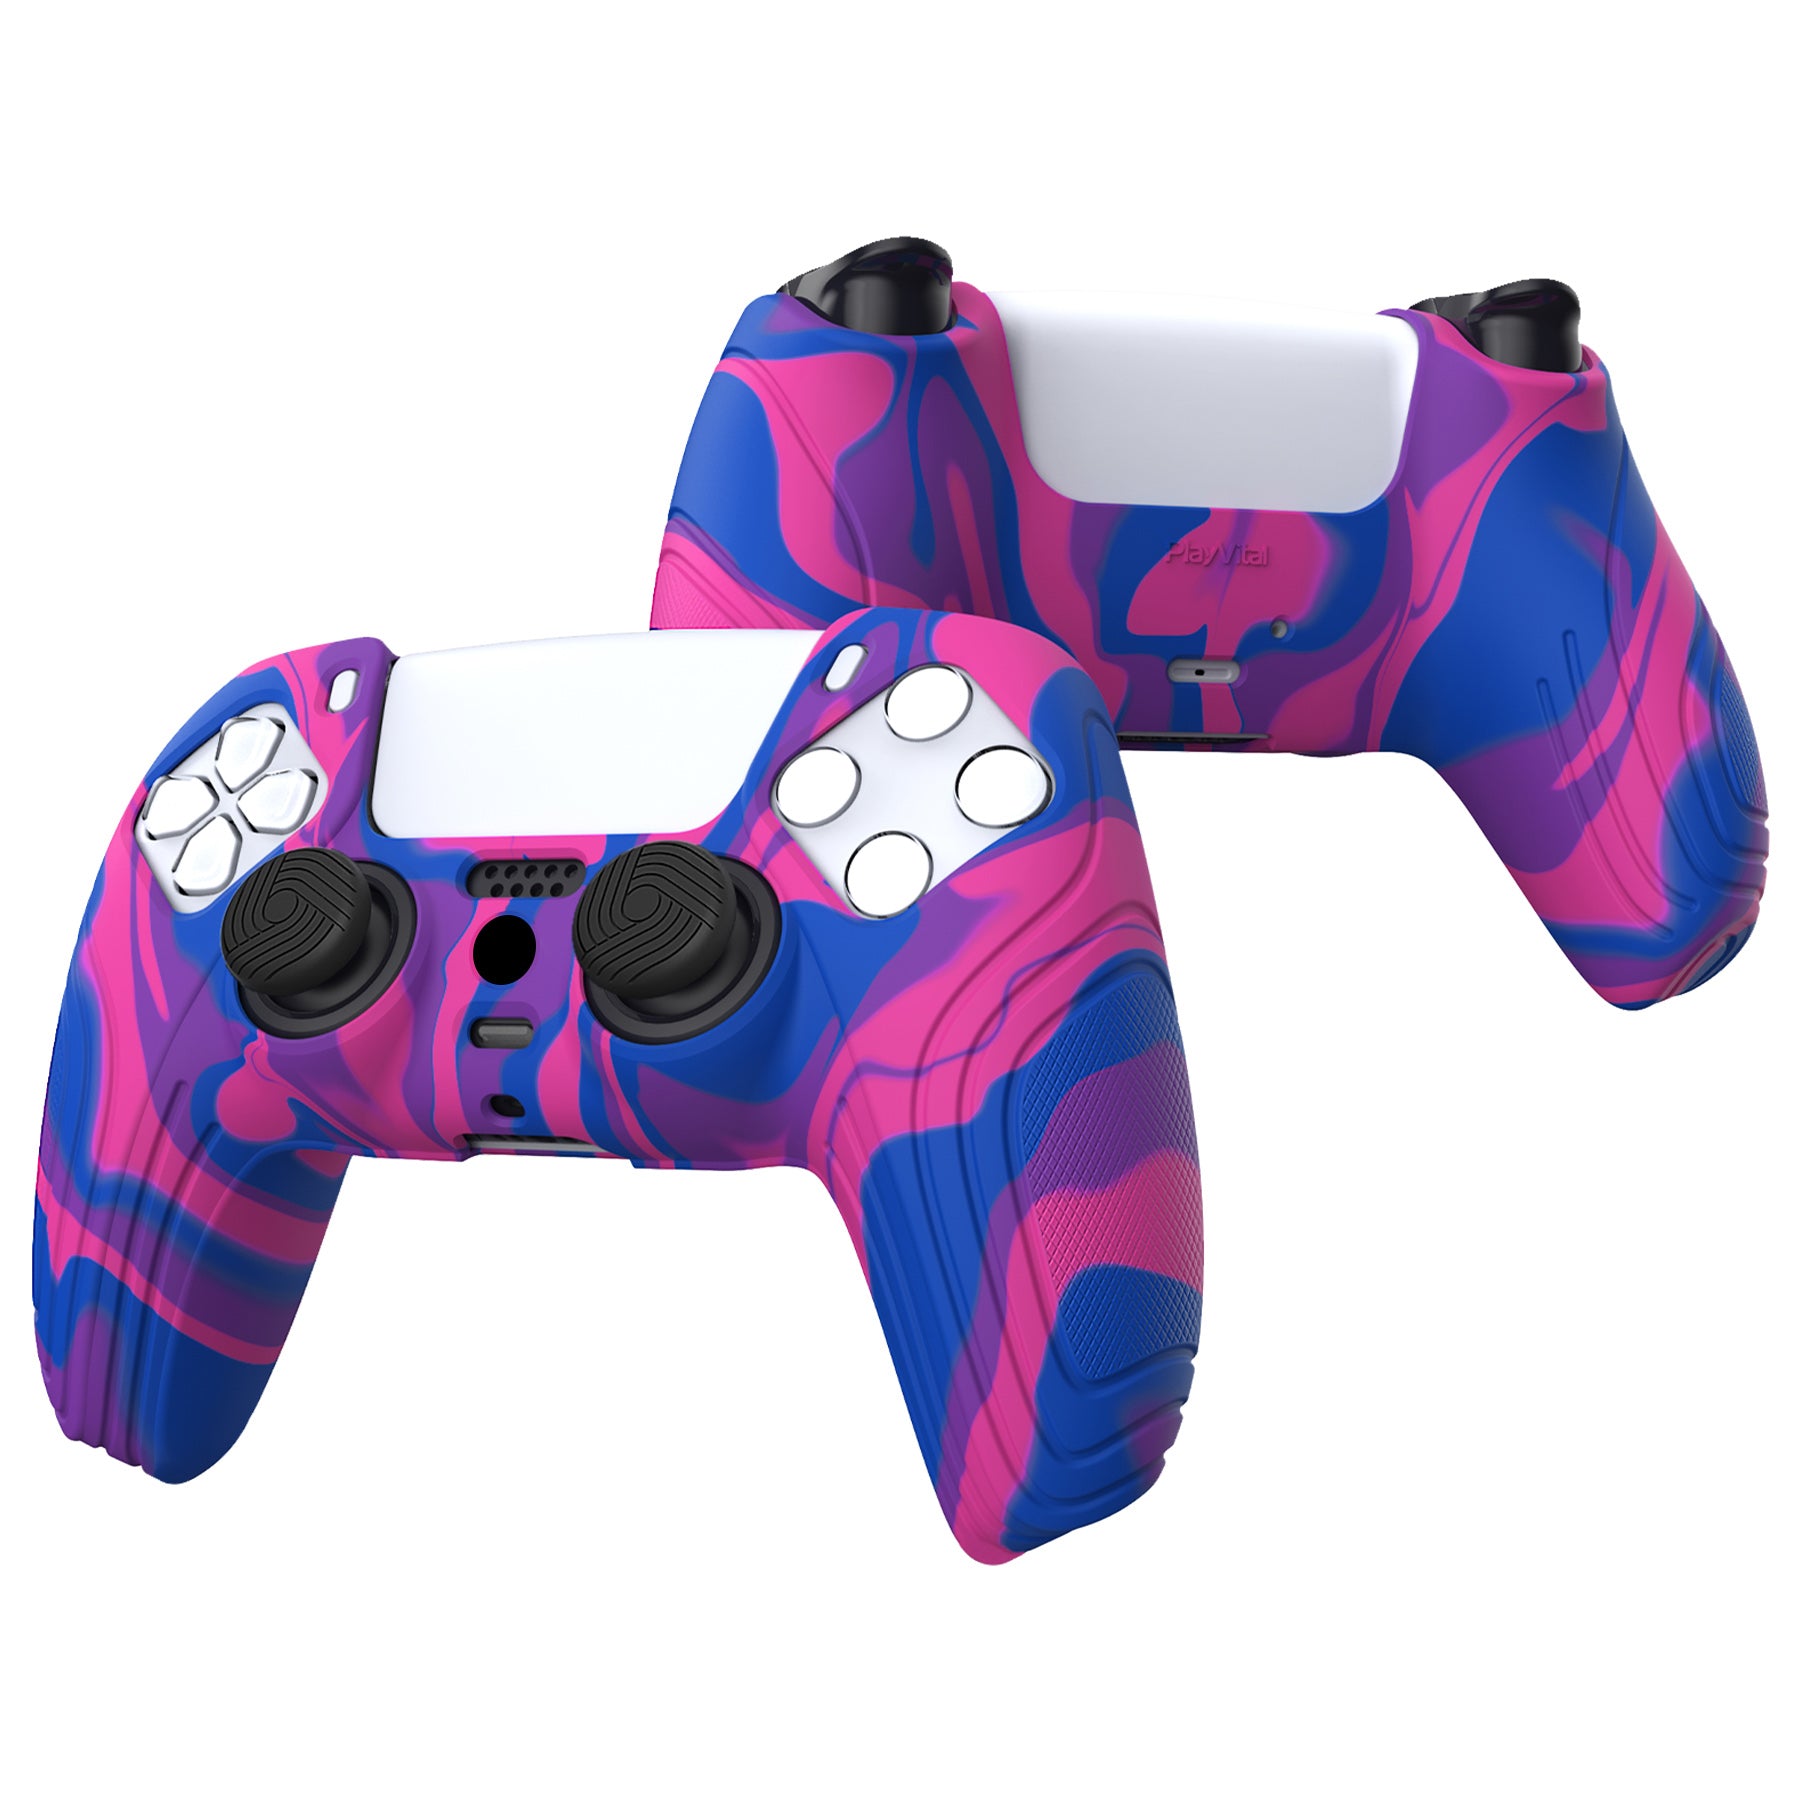 PlayVital Samurai Edition Anti-Slip Silicone Cover Skin with Thumb Grip Caps for PS5 Wireless Controller - Pink & Purple & Blue - BWPF015 PlayVital